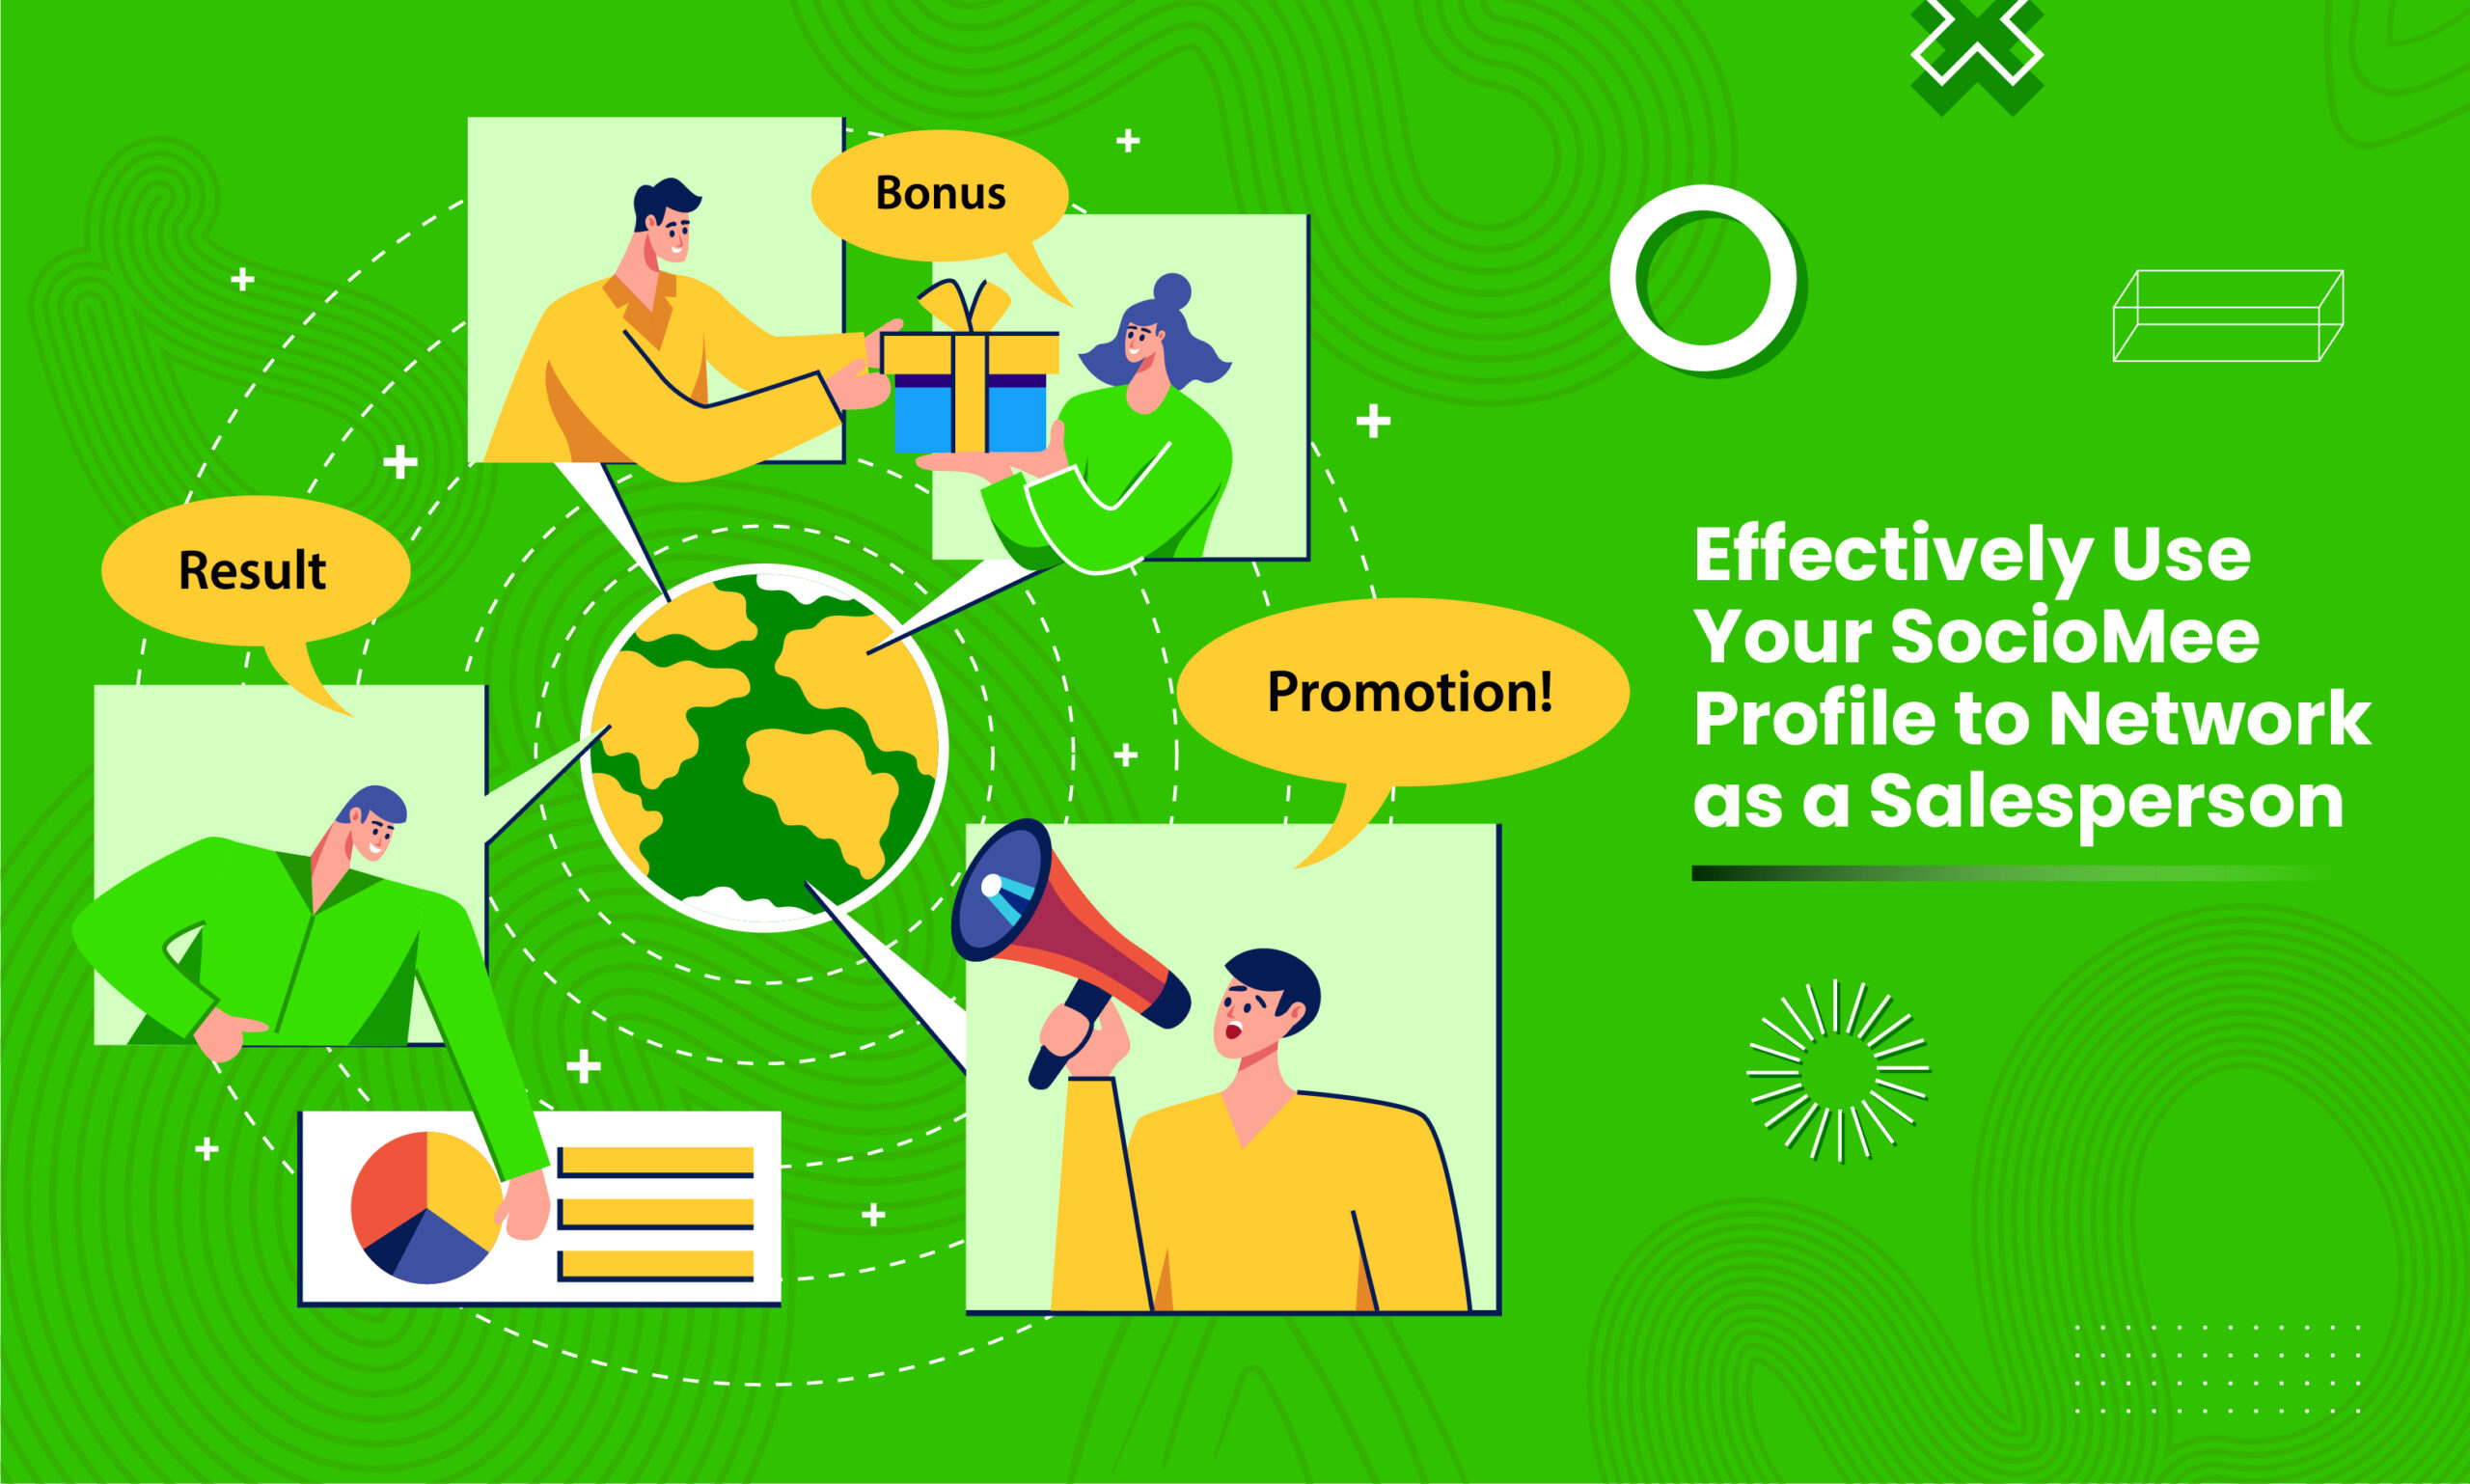 How to Effectively Use Your SocioMee Profile to Network as a Salesperson